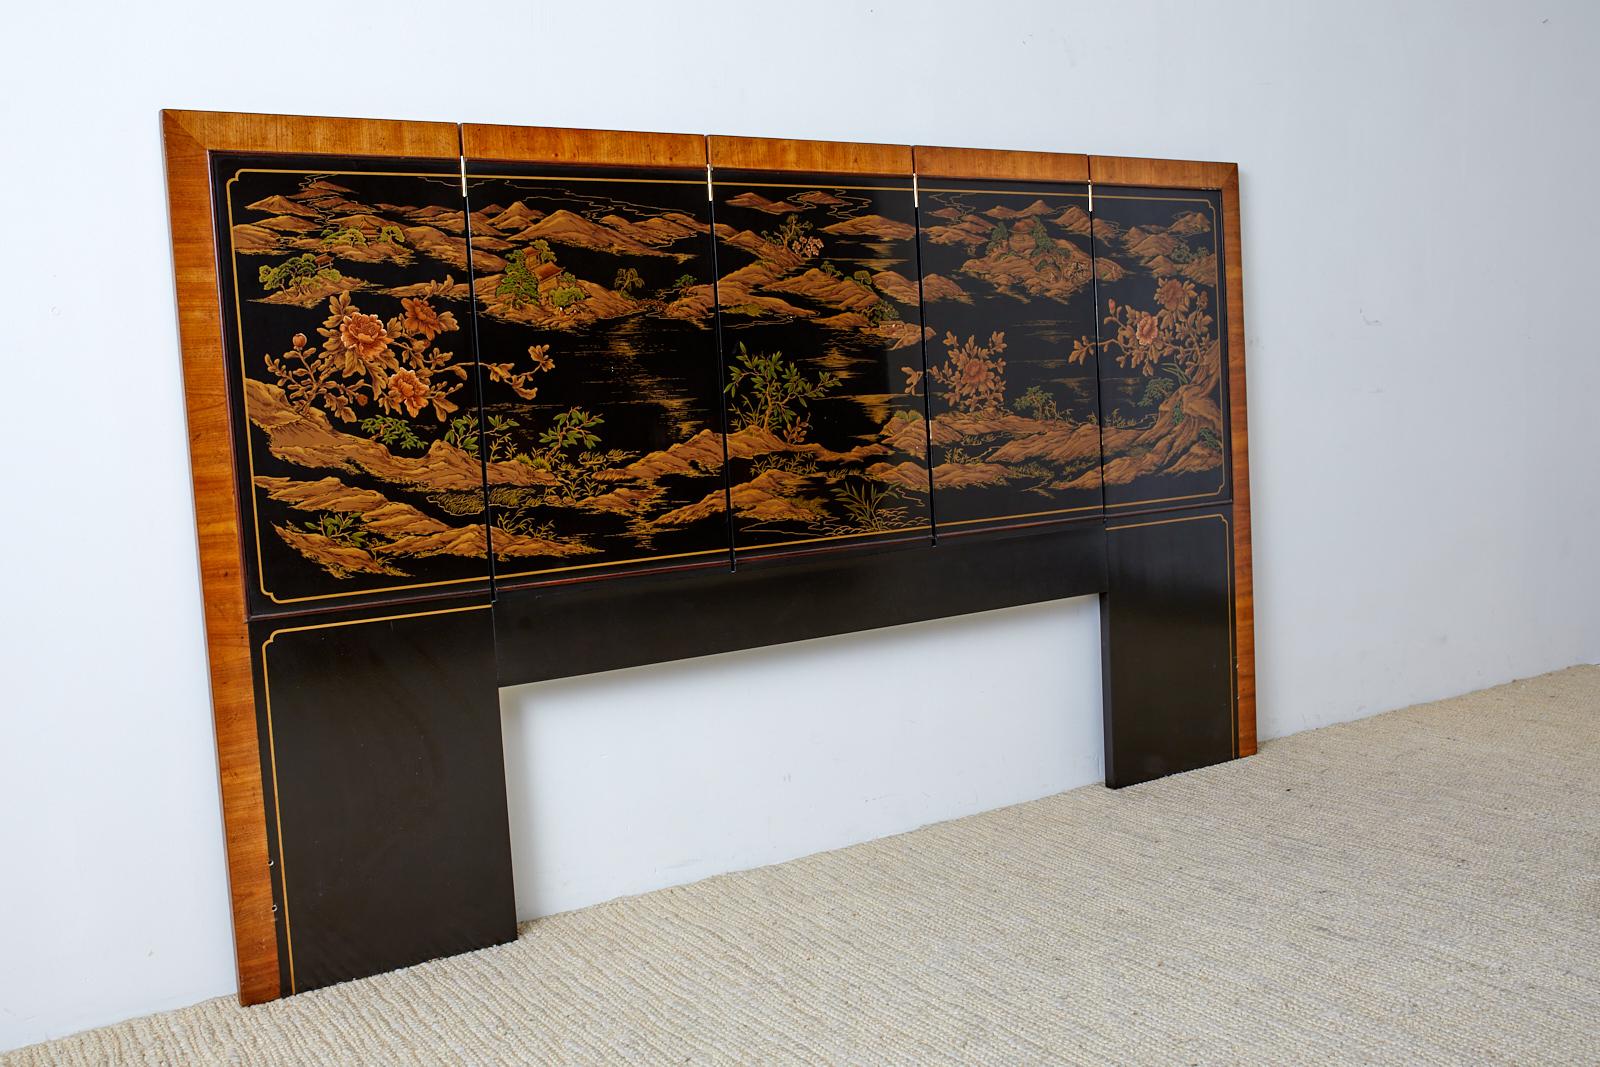 Hollywood Regency five-panel screen headboard featuring a lacquered Chinese Coromandel style decoration. Appears to be a king size board with mounting holes on each side 75 inches wide. Made by Drexel heritage with a mahogany bordering beautifully